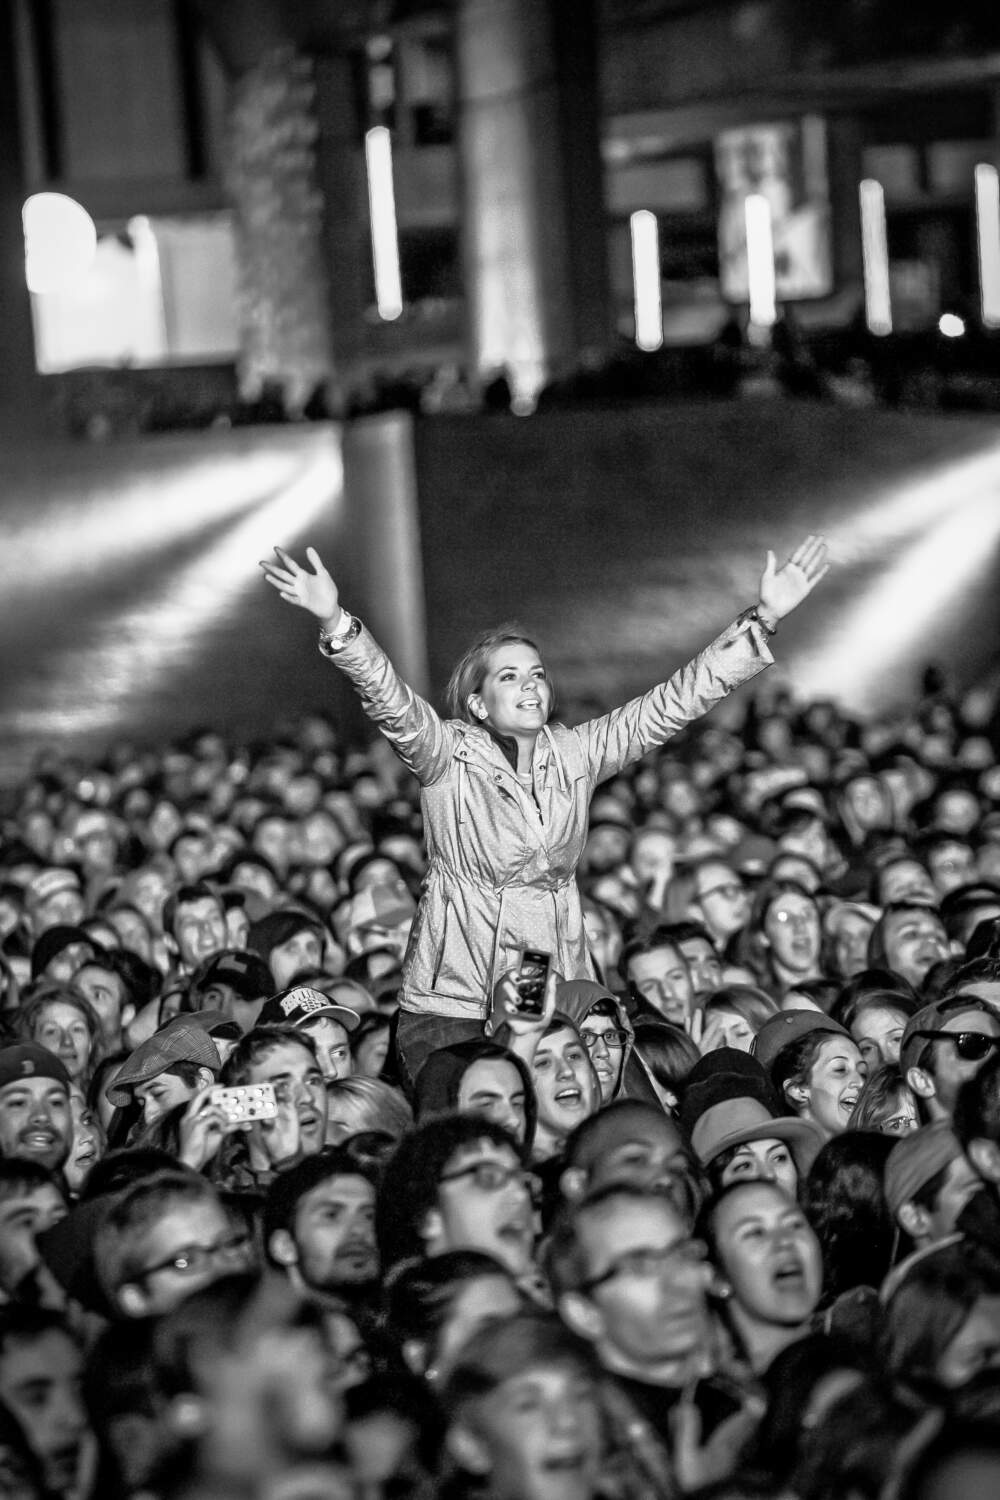 Attendees of the first Boston Calling in May 2013. (Courtesy Mike Diskin)